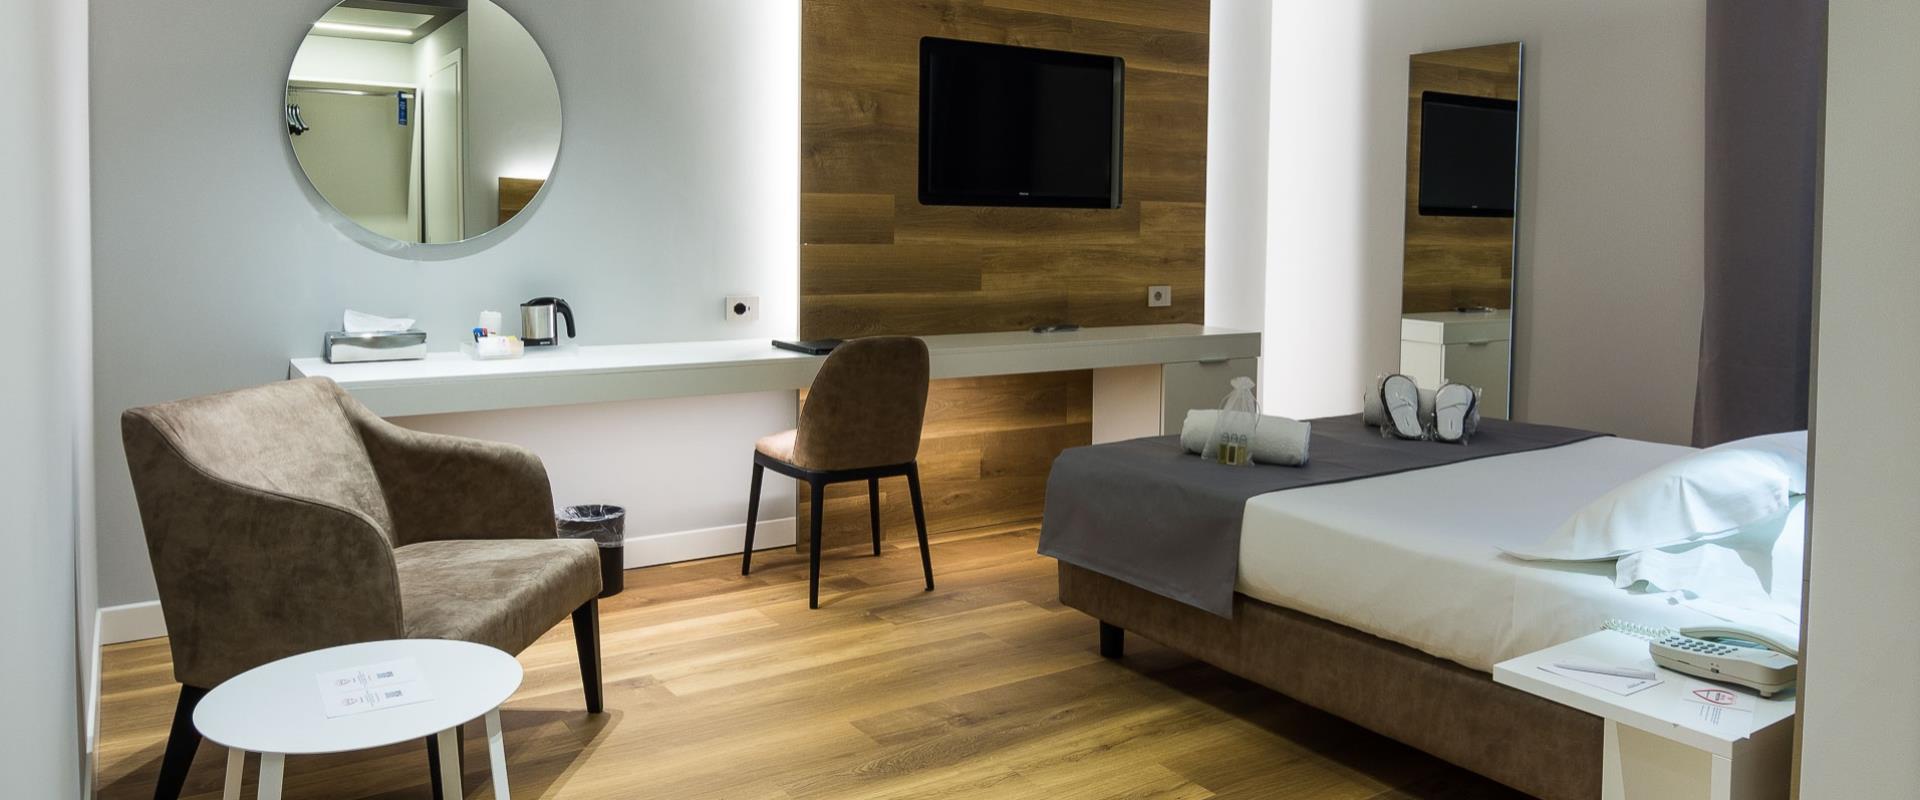 Looking for a hotel with elegant and comfortable rooms in Verona? Then choose Hotel Turismo, modern 4 stars in Verona East!